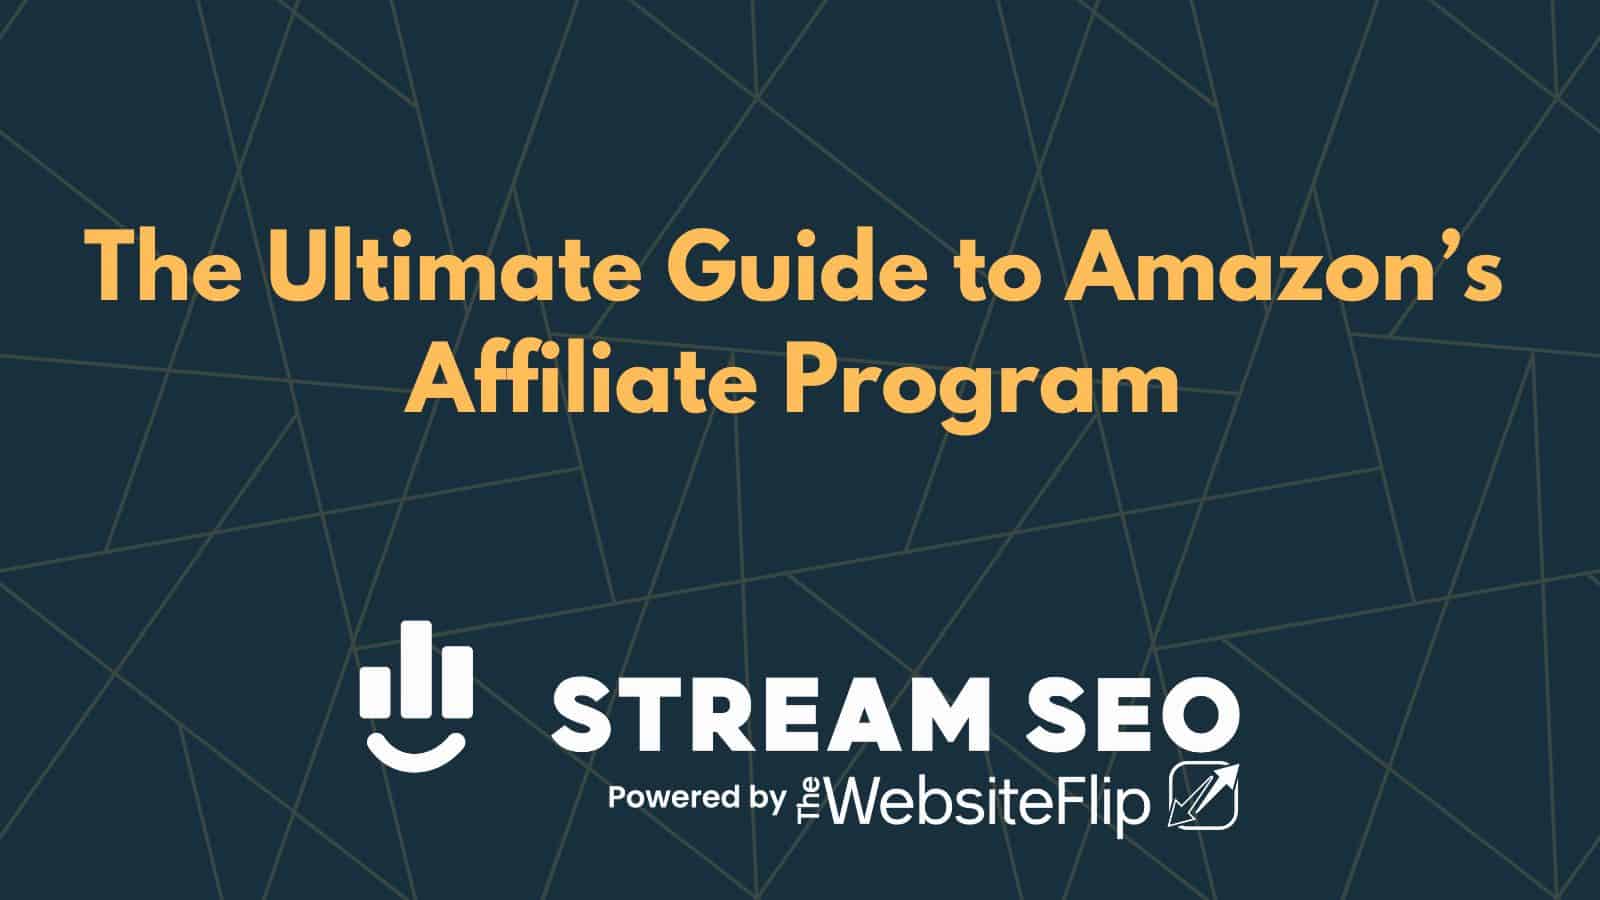 The Ultimate Guide to Amazon’s Affiliate Program